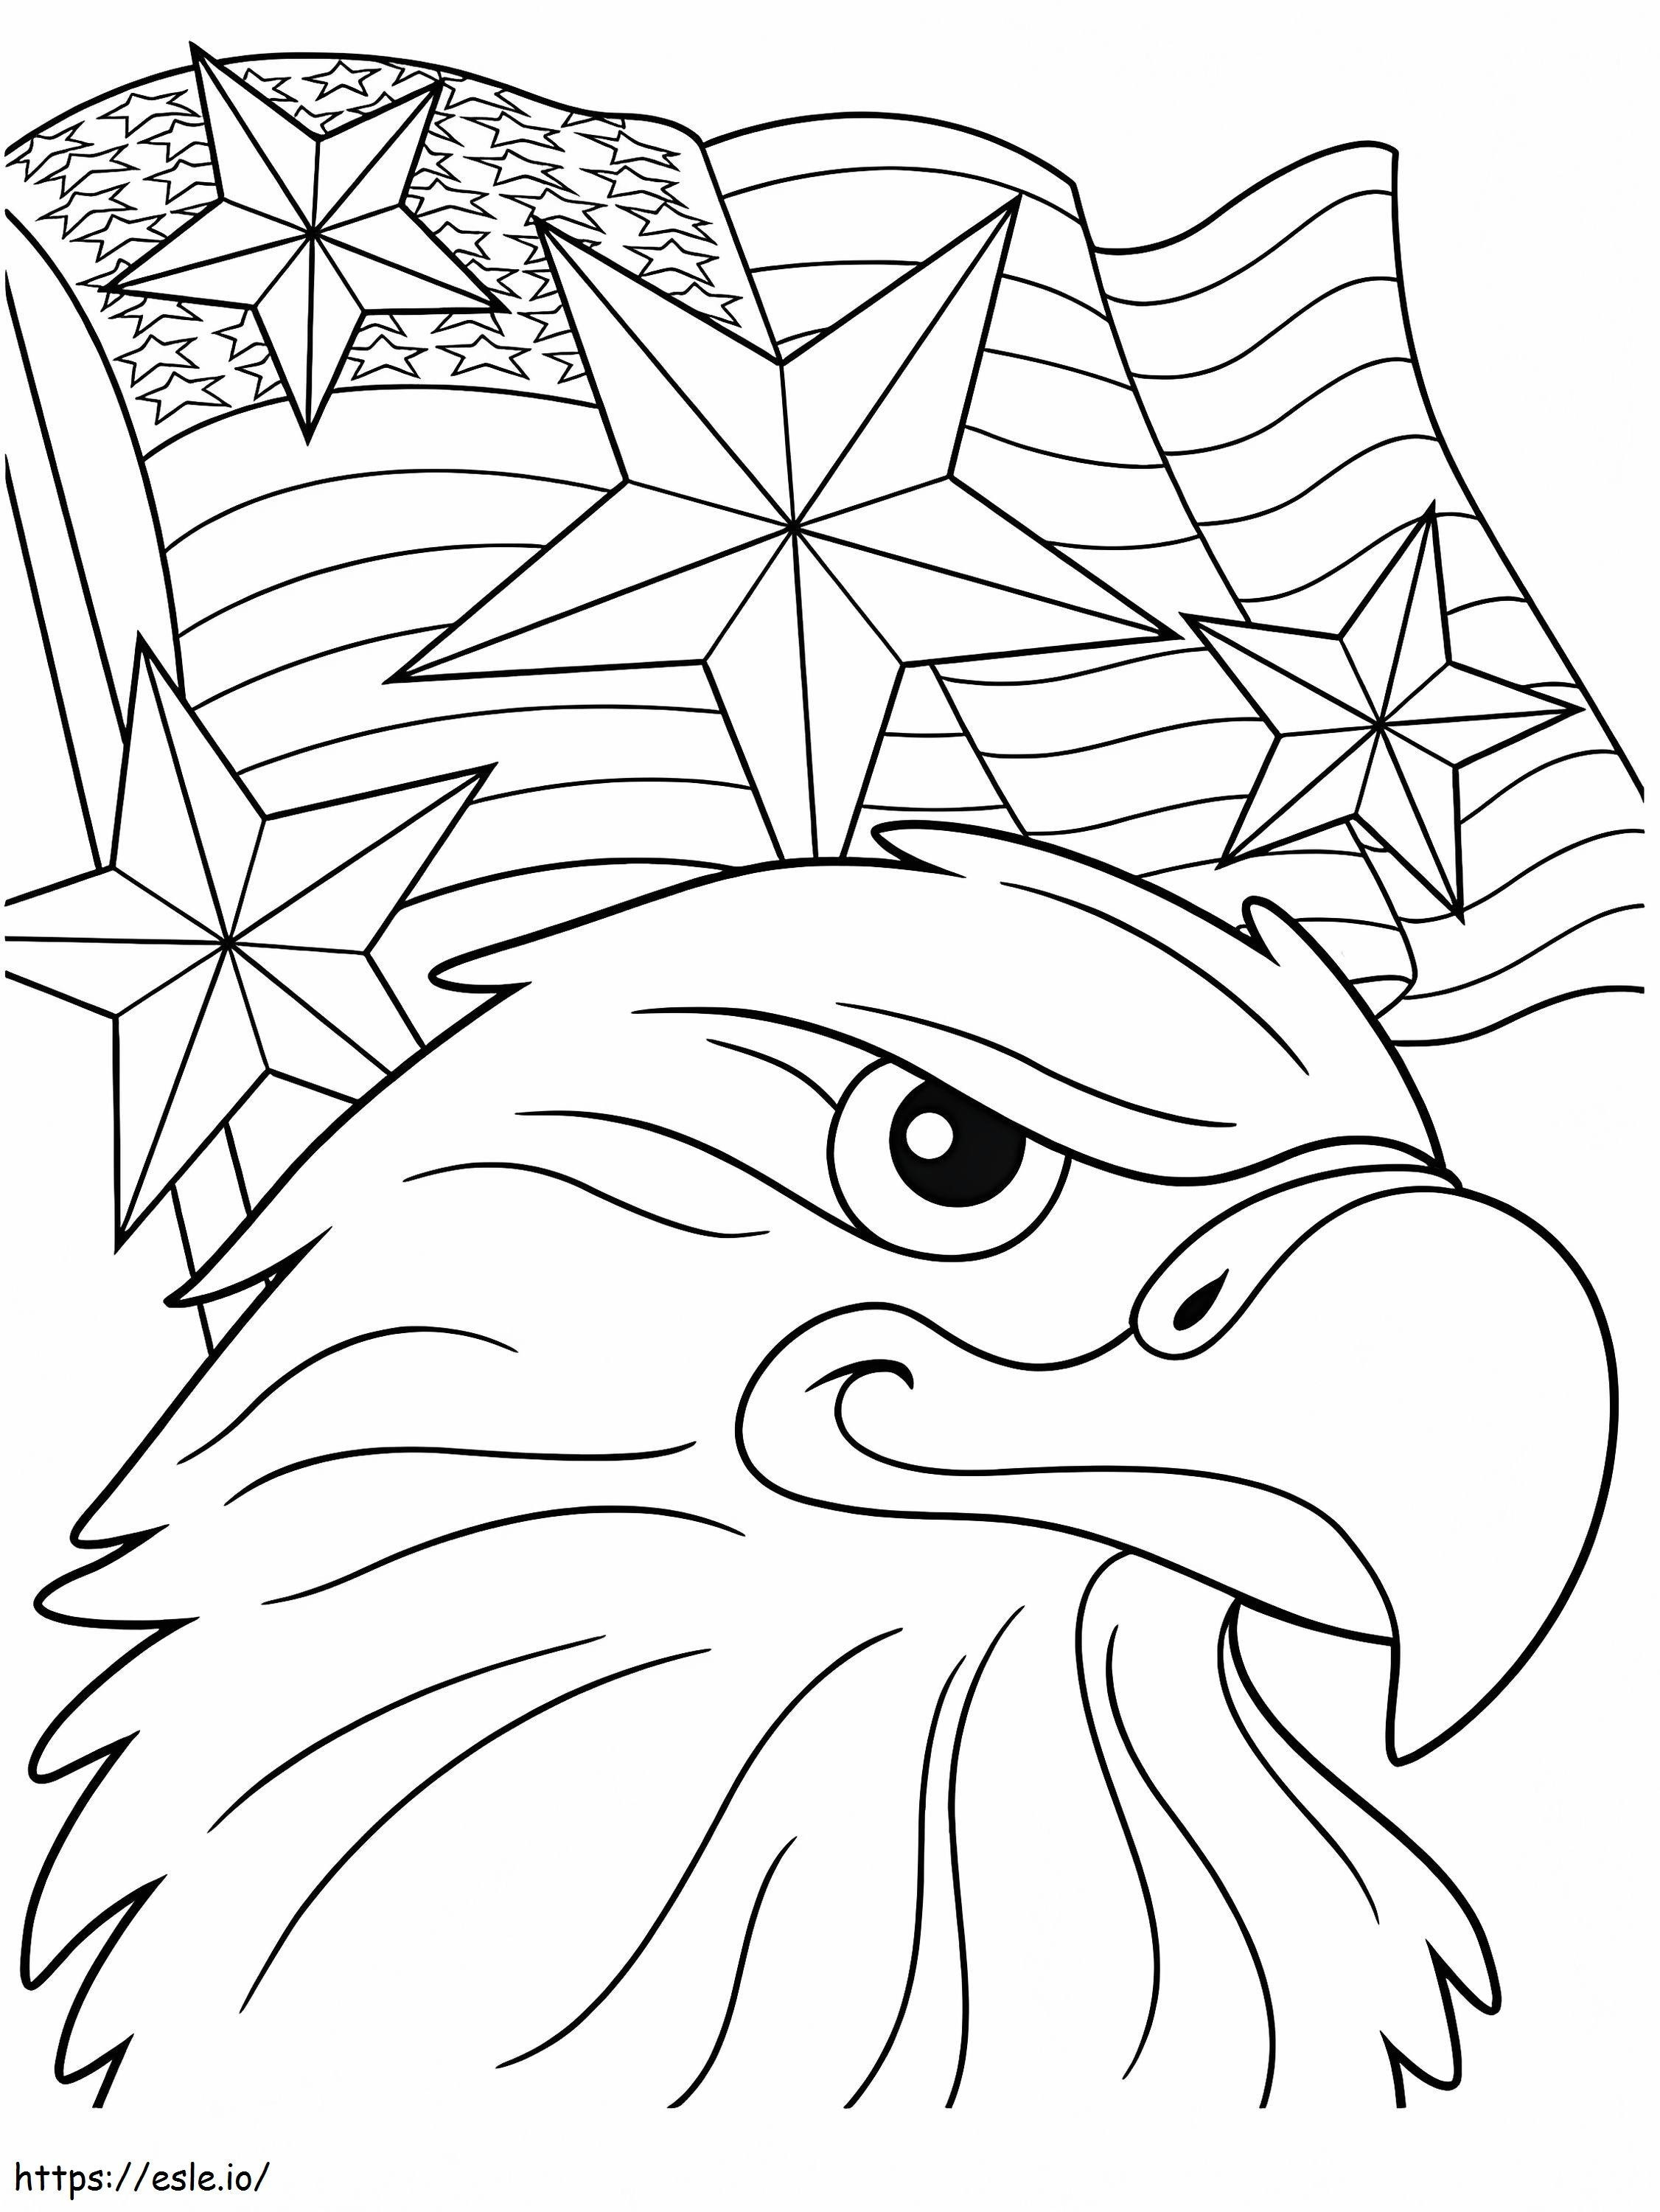 Eagle With Flag coloring page